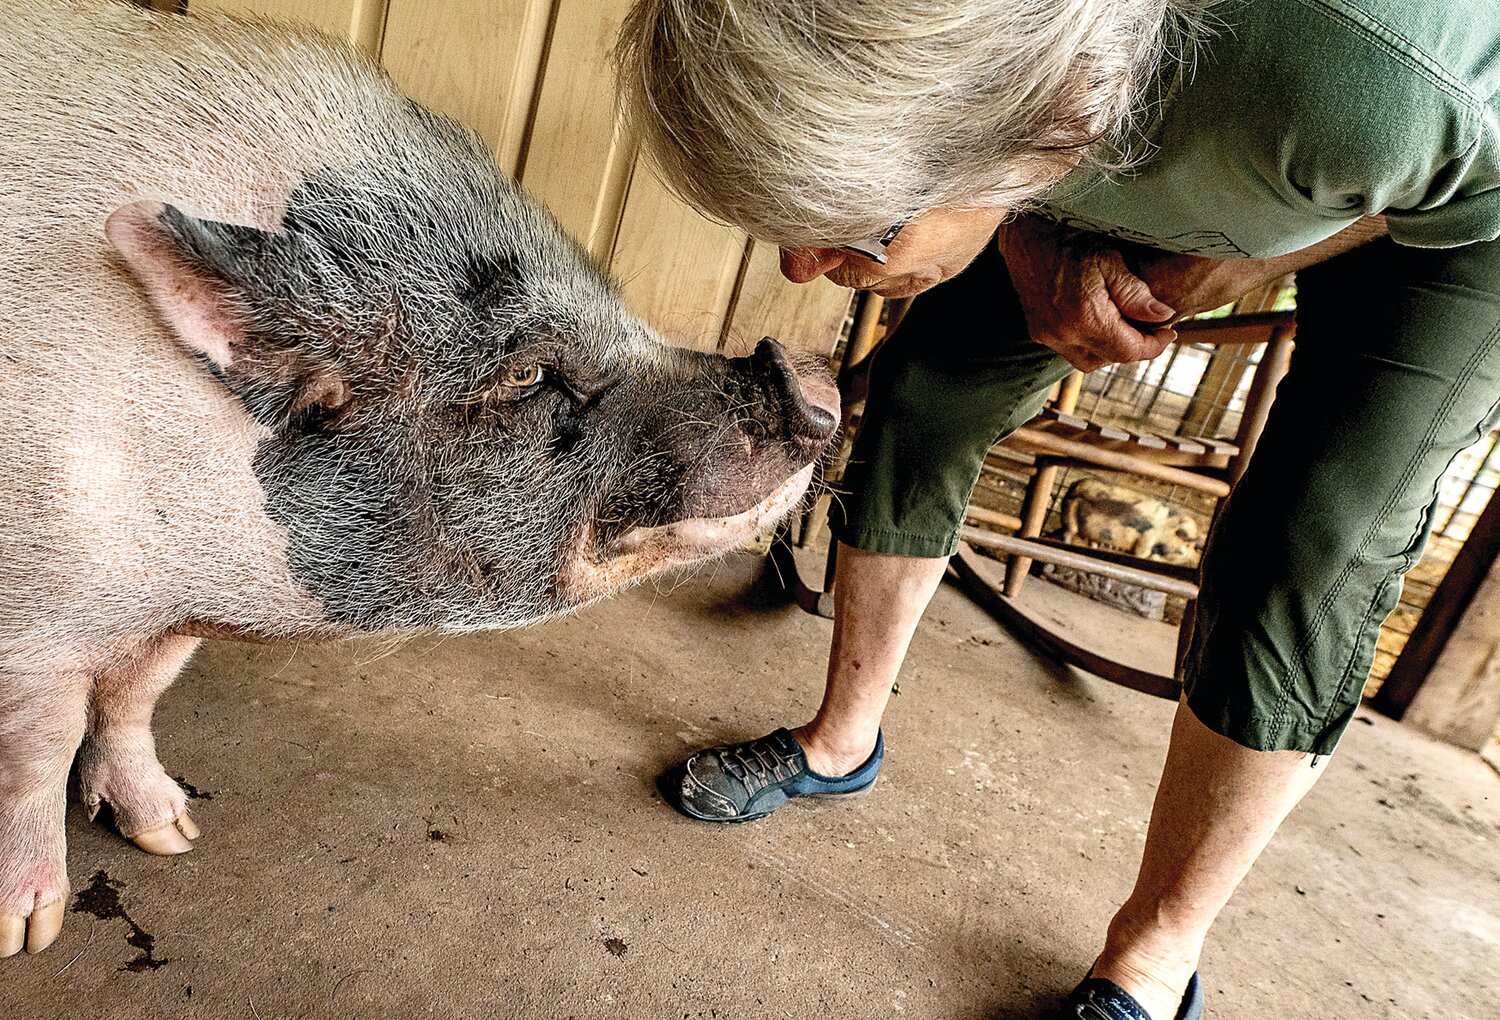 Susan Magidson leans in for a kiss. She is founder and owner of Ross Mill Farm, a full service farm and care center that is exclusively for pigs. At least 150 pigs reside, some roaming free, at the Warwick Township farm that is spread out across dozens of acres.